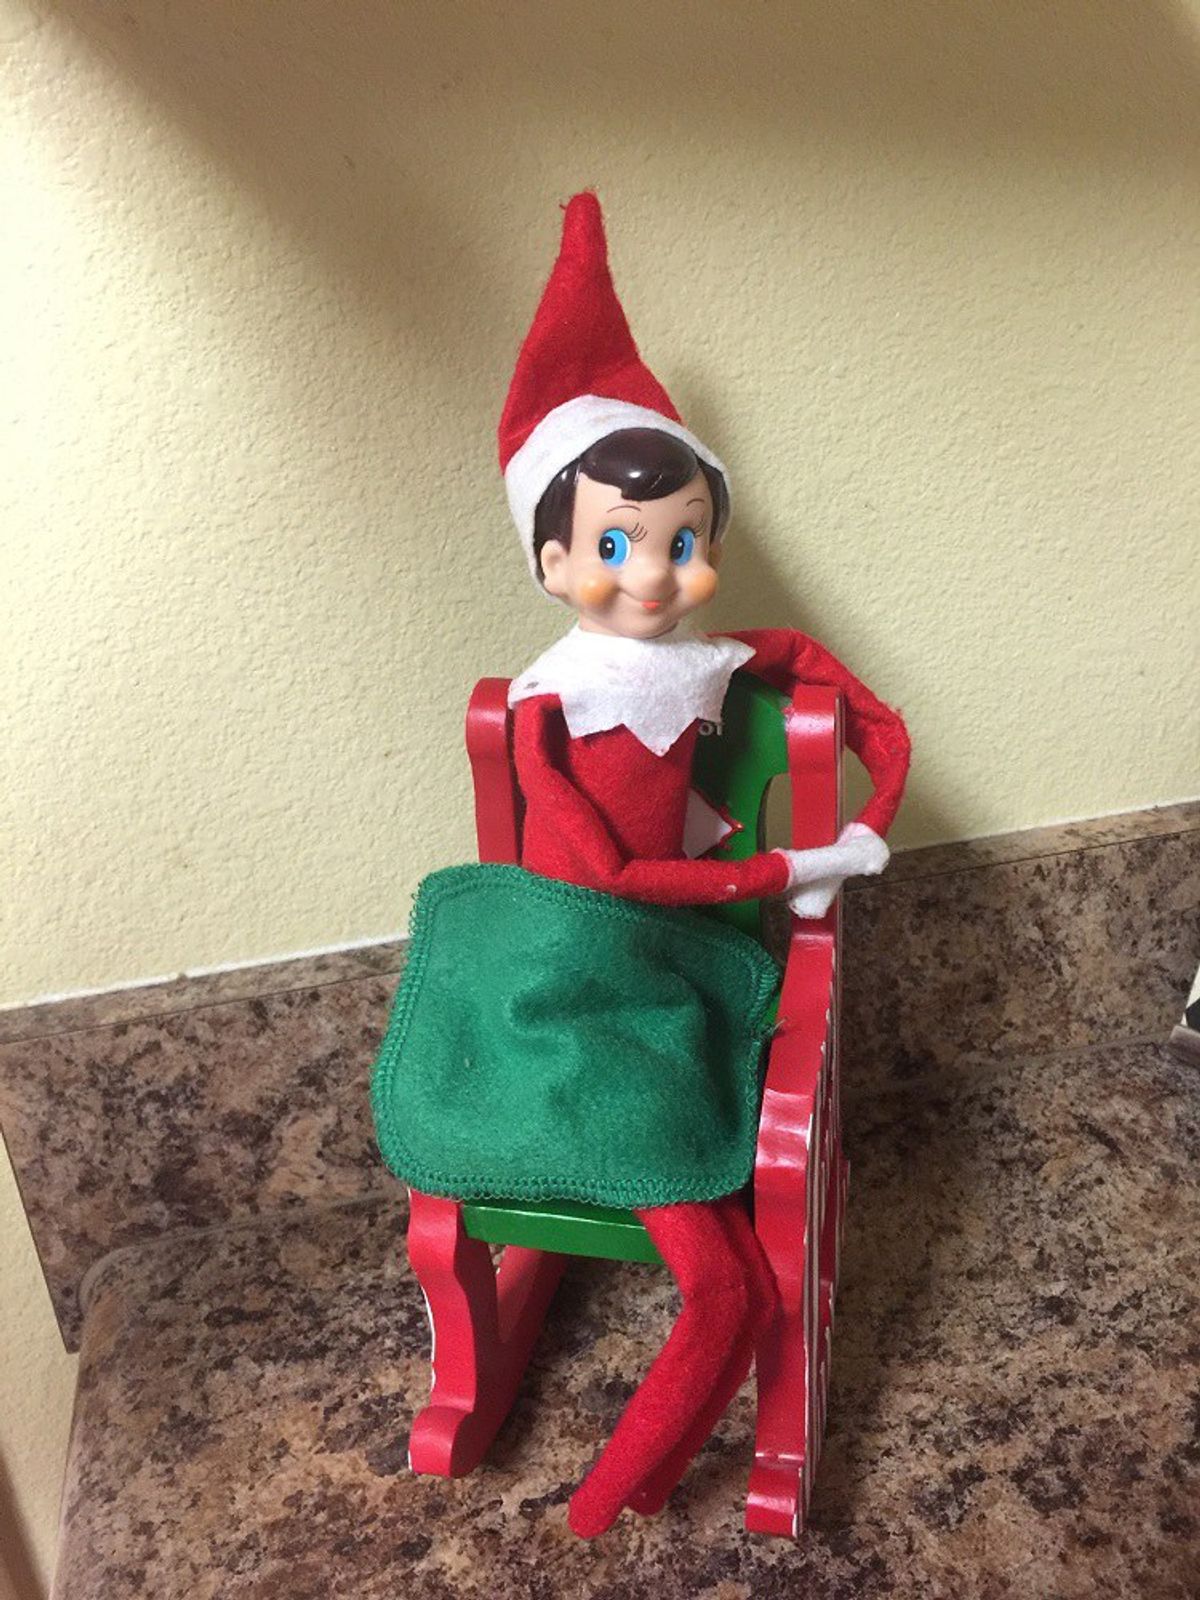 The Job Of Being The Elf on The Shelf